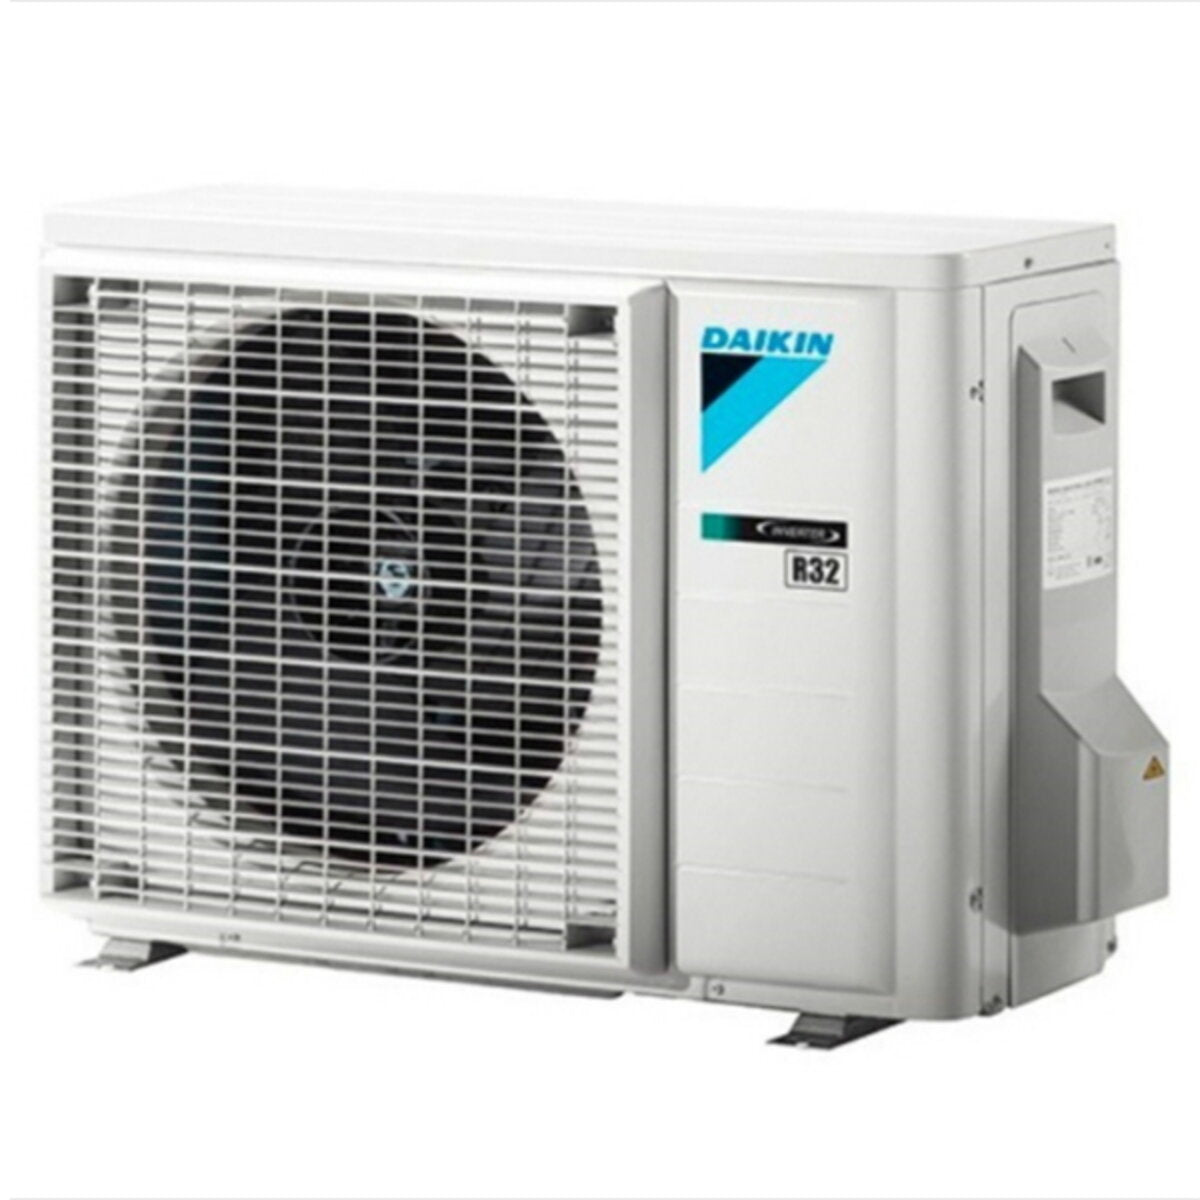 Daikin Mini Sky FDXM-F9 ductable air conditioner 12000 BTU inverter A+ R32 with wall control